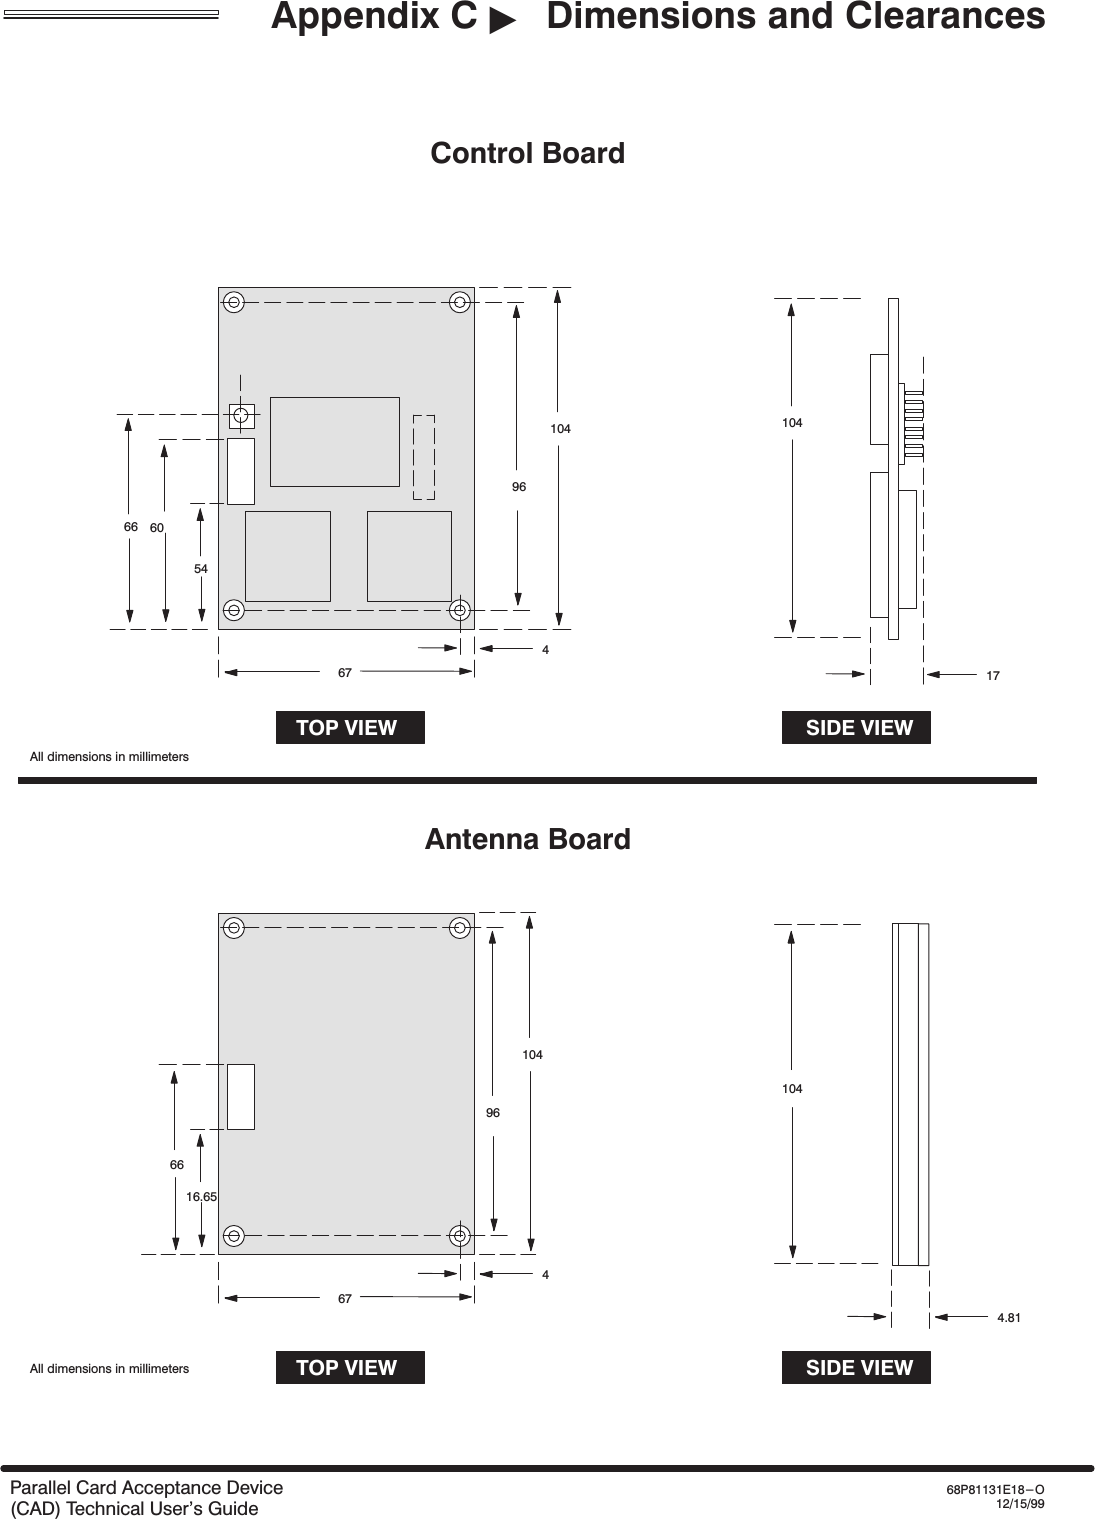 Appendix C &quot;Dimensions and ClearancesParallel Card Acceptance Device(CAD) Technical User&apos;s Guide68P81131E18-O12/15/99961044676654TOP VIEW SIDE VIEW10417Control Board9610446716.65TOP VIEW SIDE VIEW1044.81Antenna Board6660All dimensions in millimetersAll dimensions in millimeters